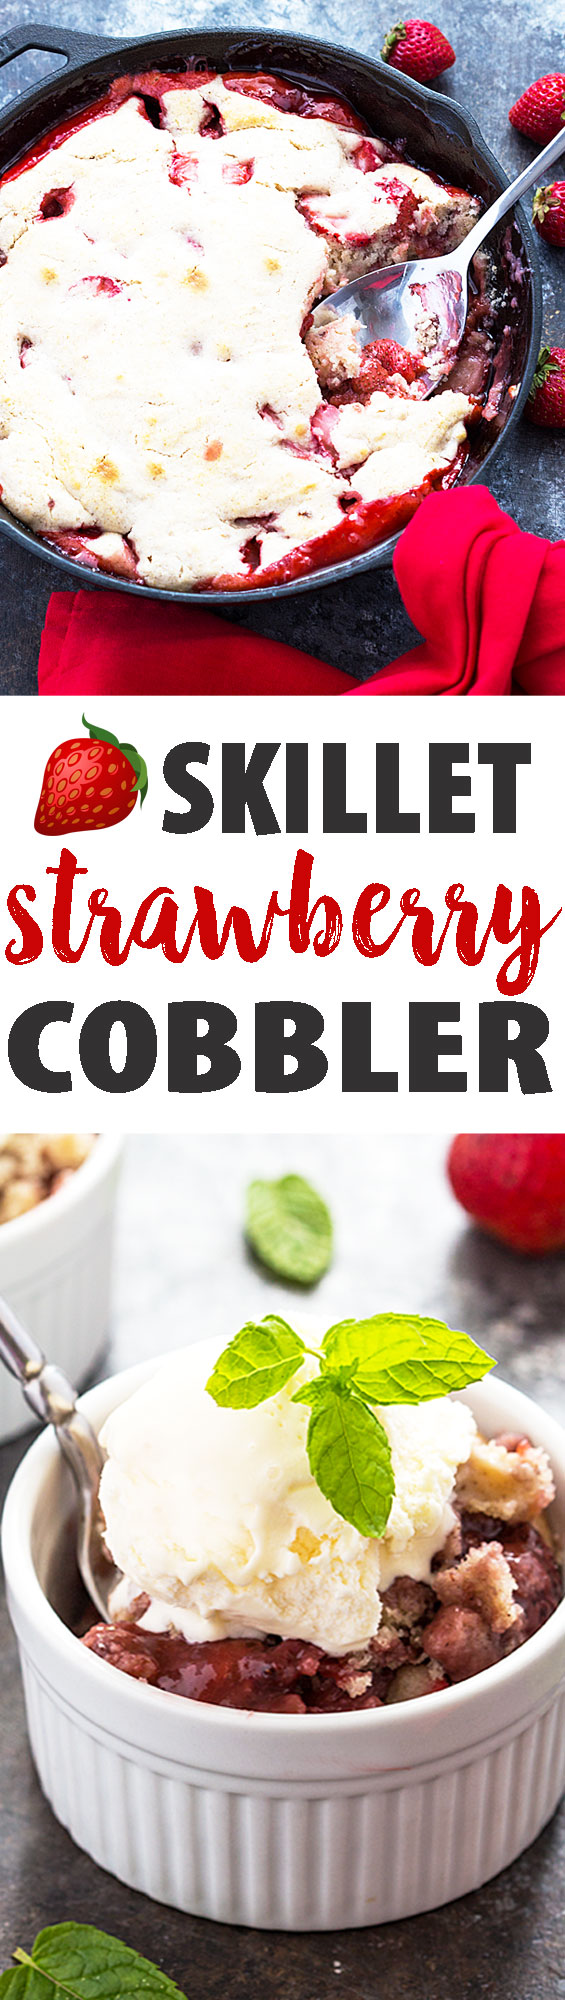 A two image vertical collage of skillet strawberry cobbler with overlay text in the center.